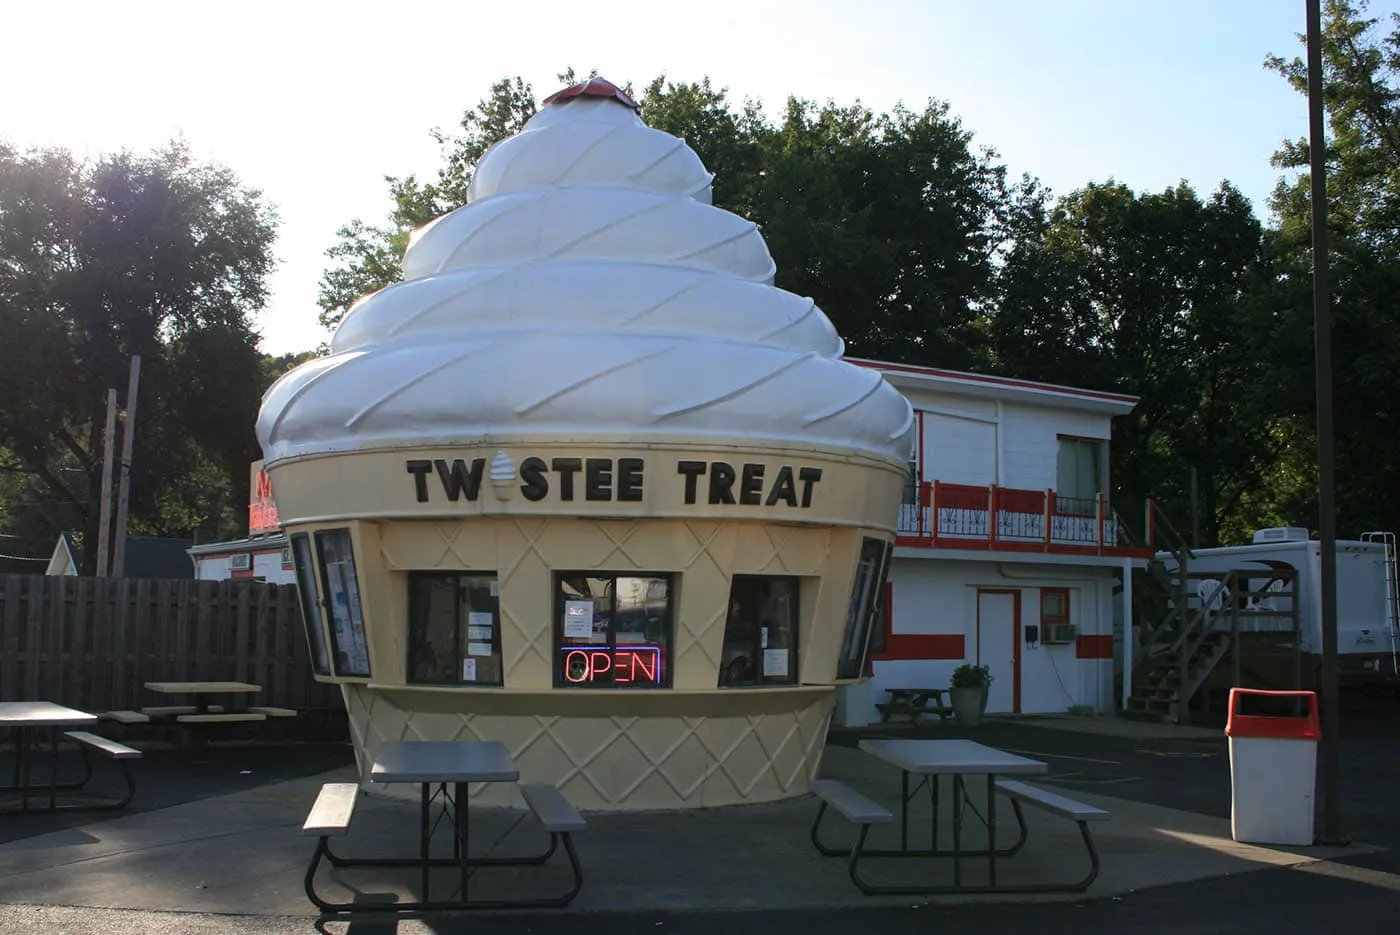 Twistee Treat in East Peoria, Illinois | The Twistee Treat franchise offers soft serve ice cream and hot dogs in giant ice cream shaped buildings across the US. Novelty Architecture + Cool Desserts